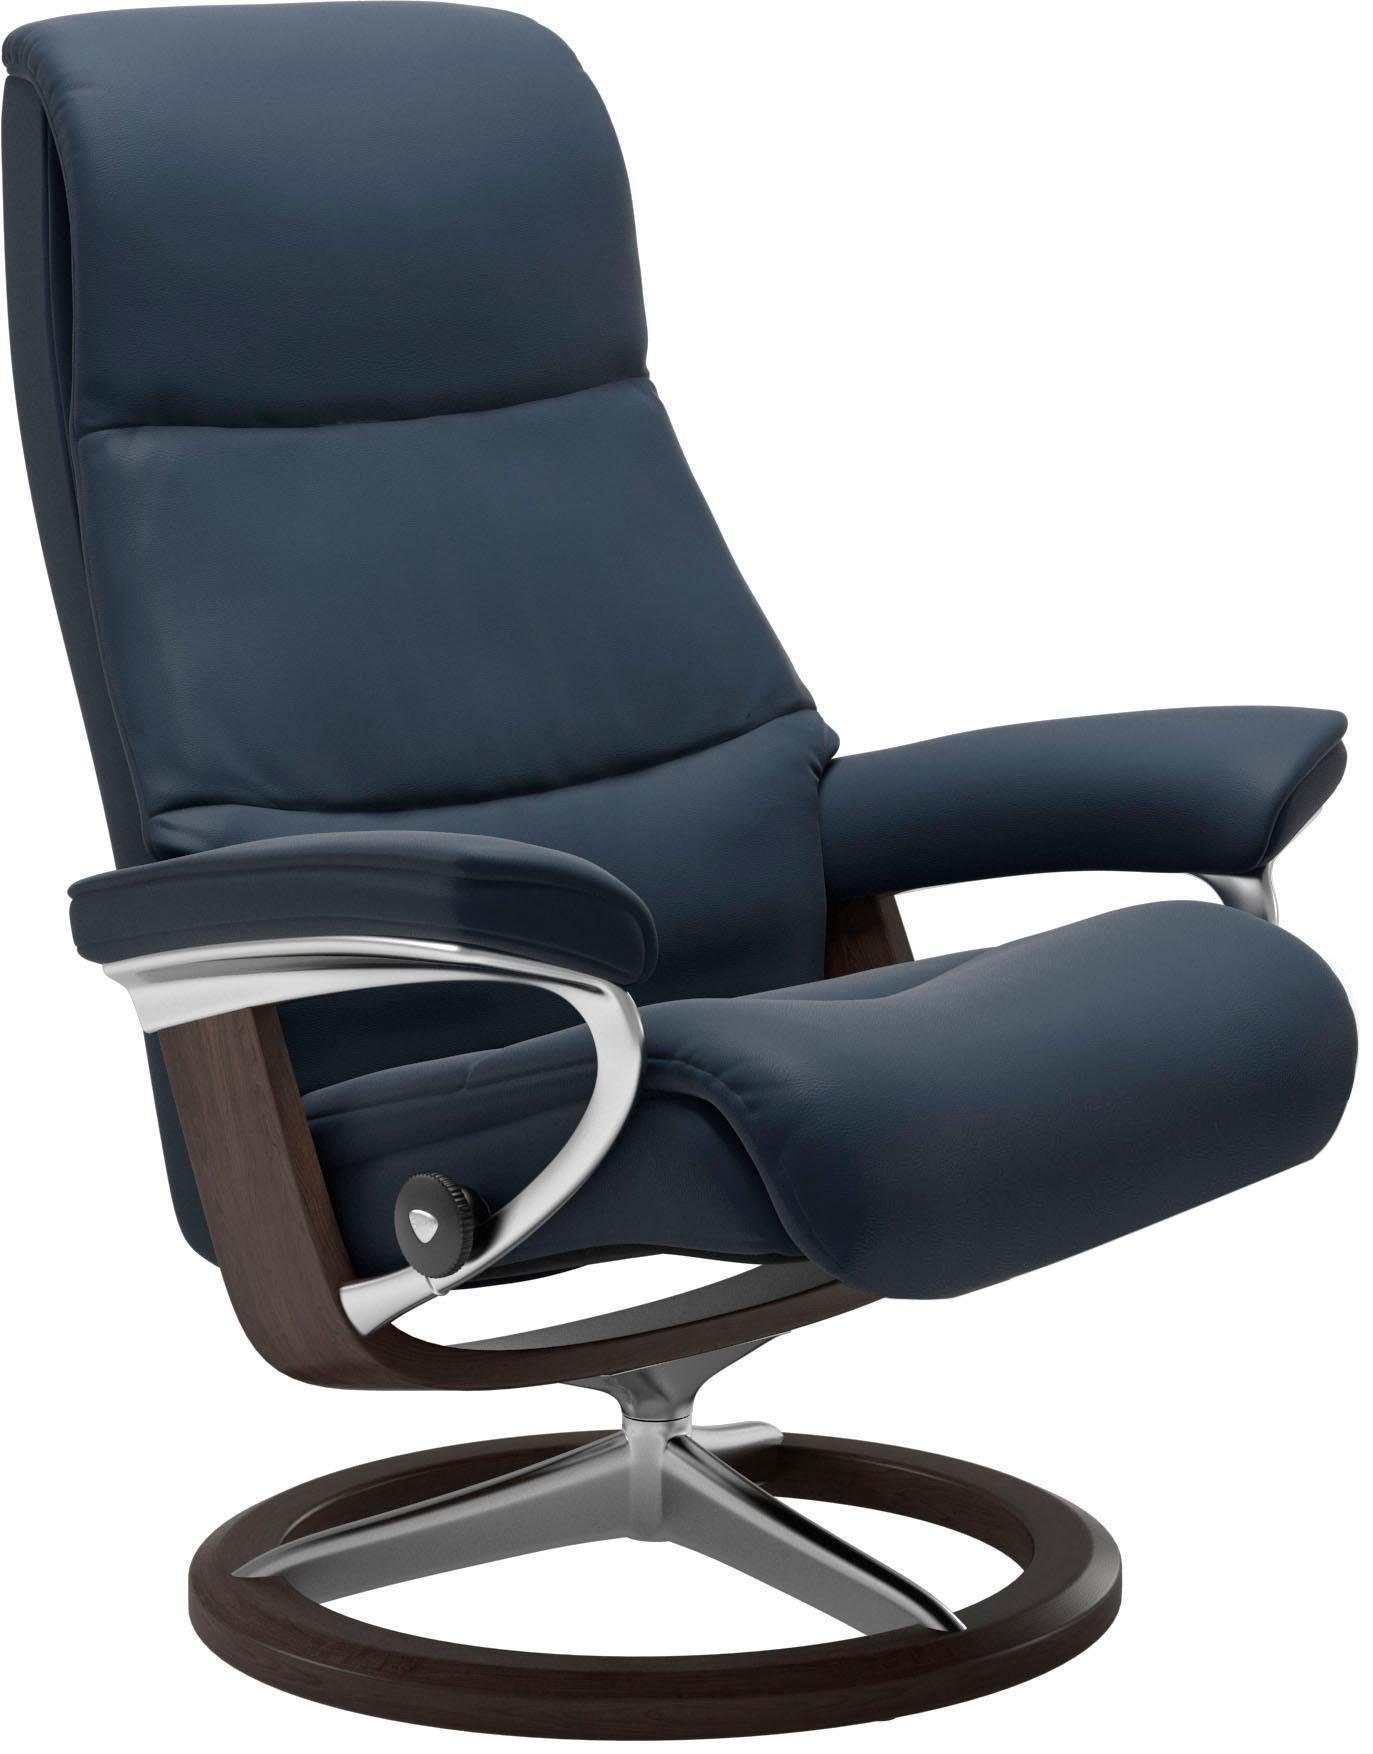 Stressless® Relaxsessel Base, mit Wenge Signature View, Größe S,Gestell